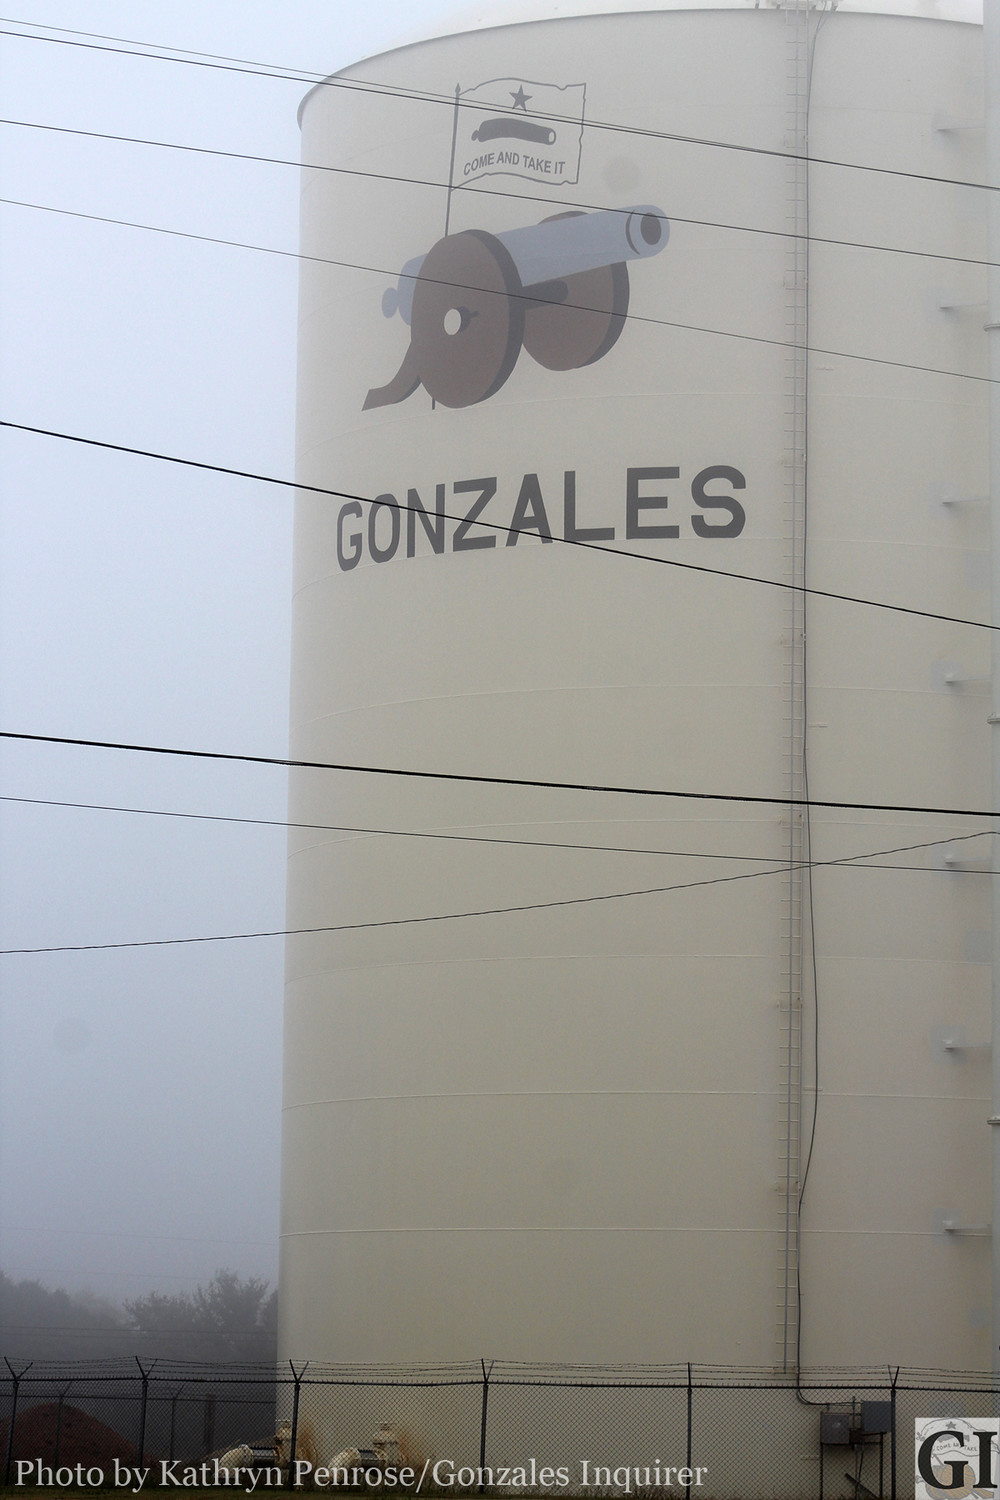 The City of Gonzales has shifted water delivery from the city’s water supply tanks to the city’s water well system, after particles were found in the water supply last week. Right now, City Manager Sean Lally is waiting for answers from the Texas Commission on Environment Quality before deciding the next step.